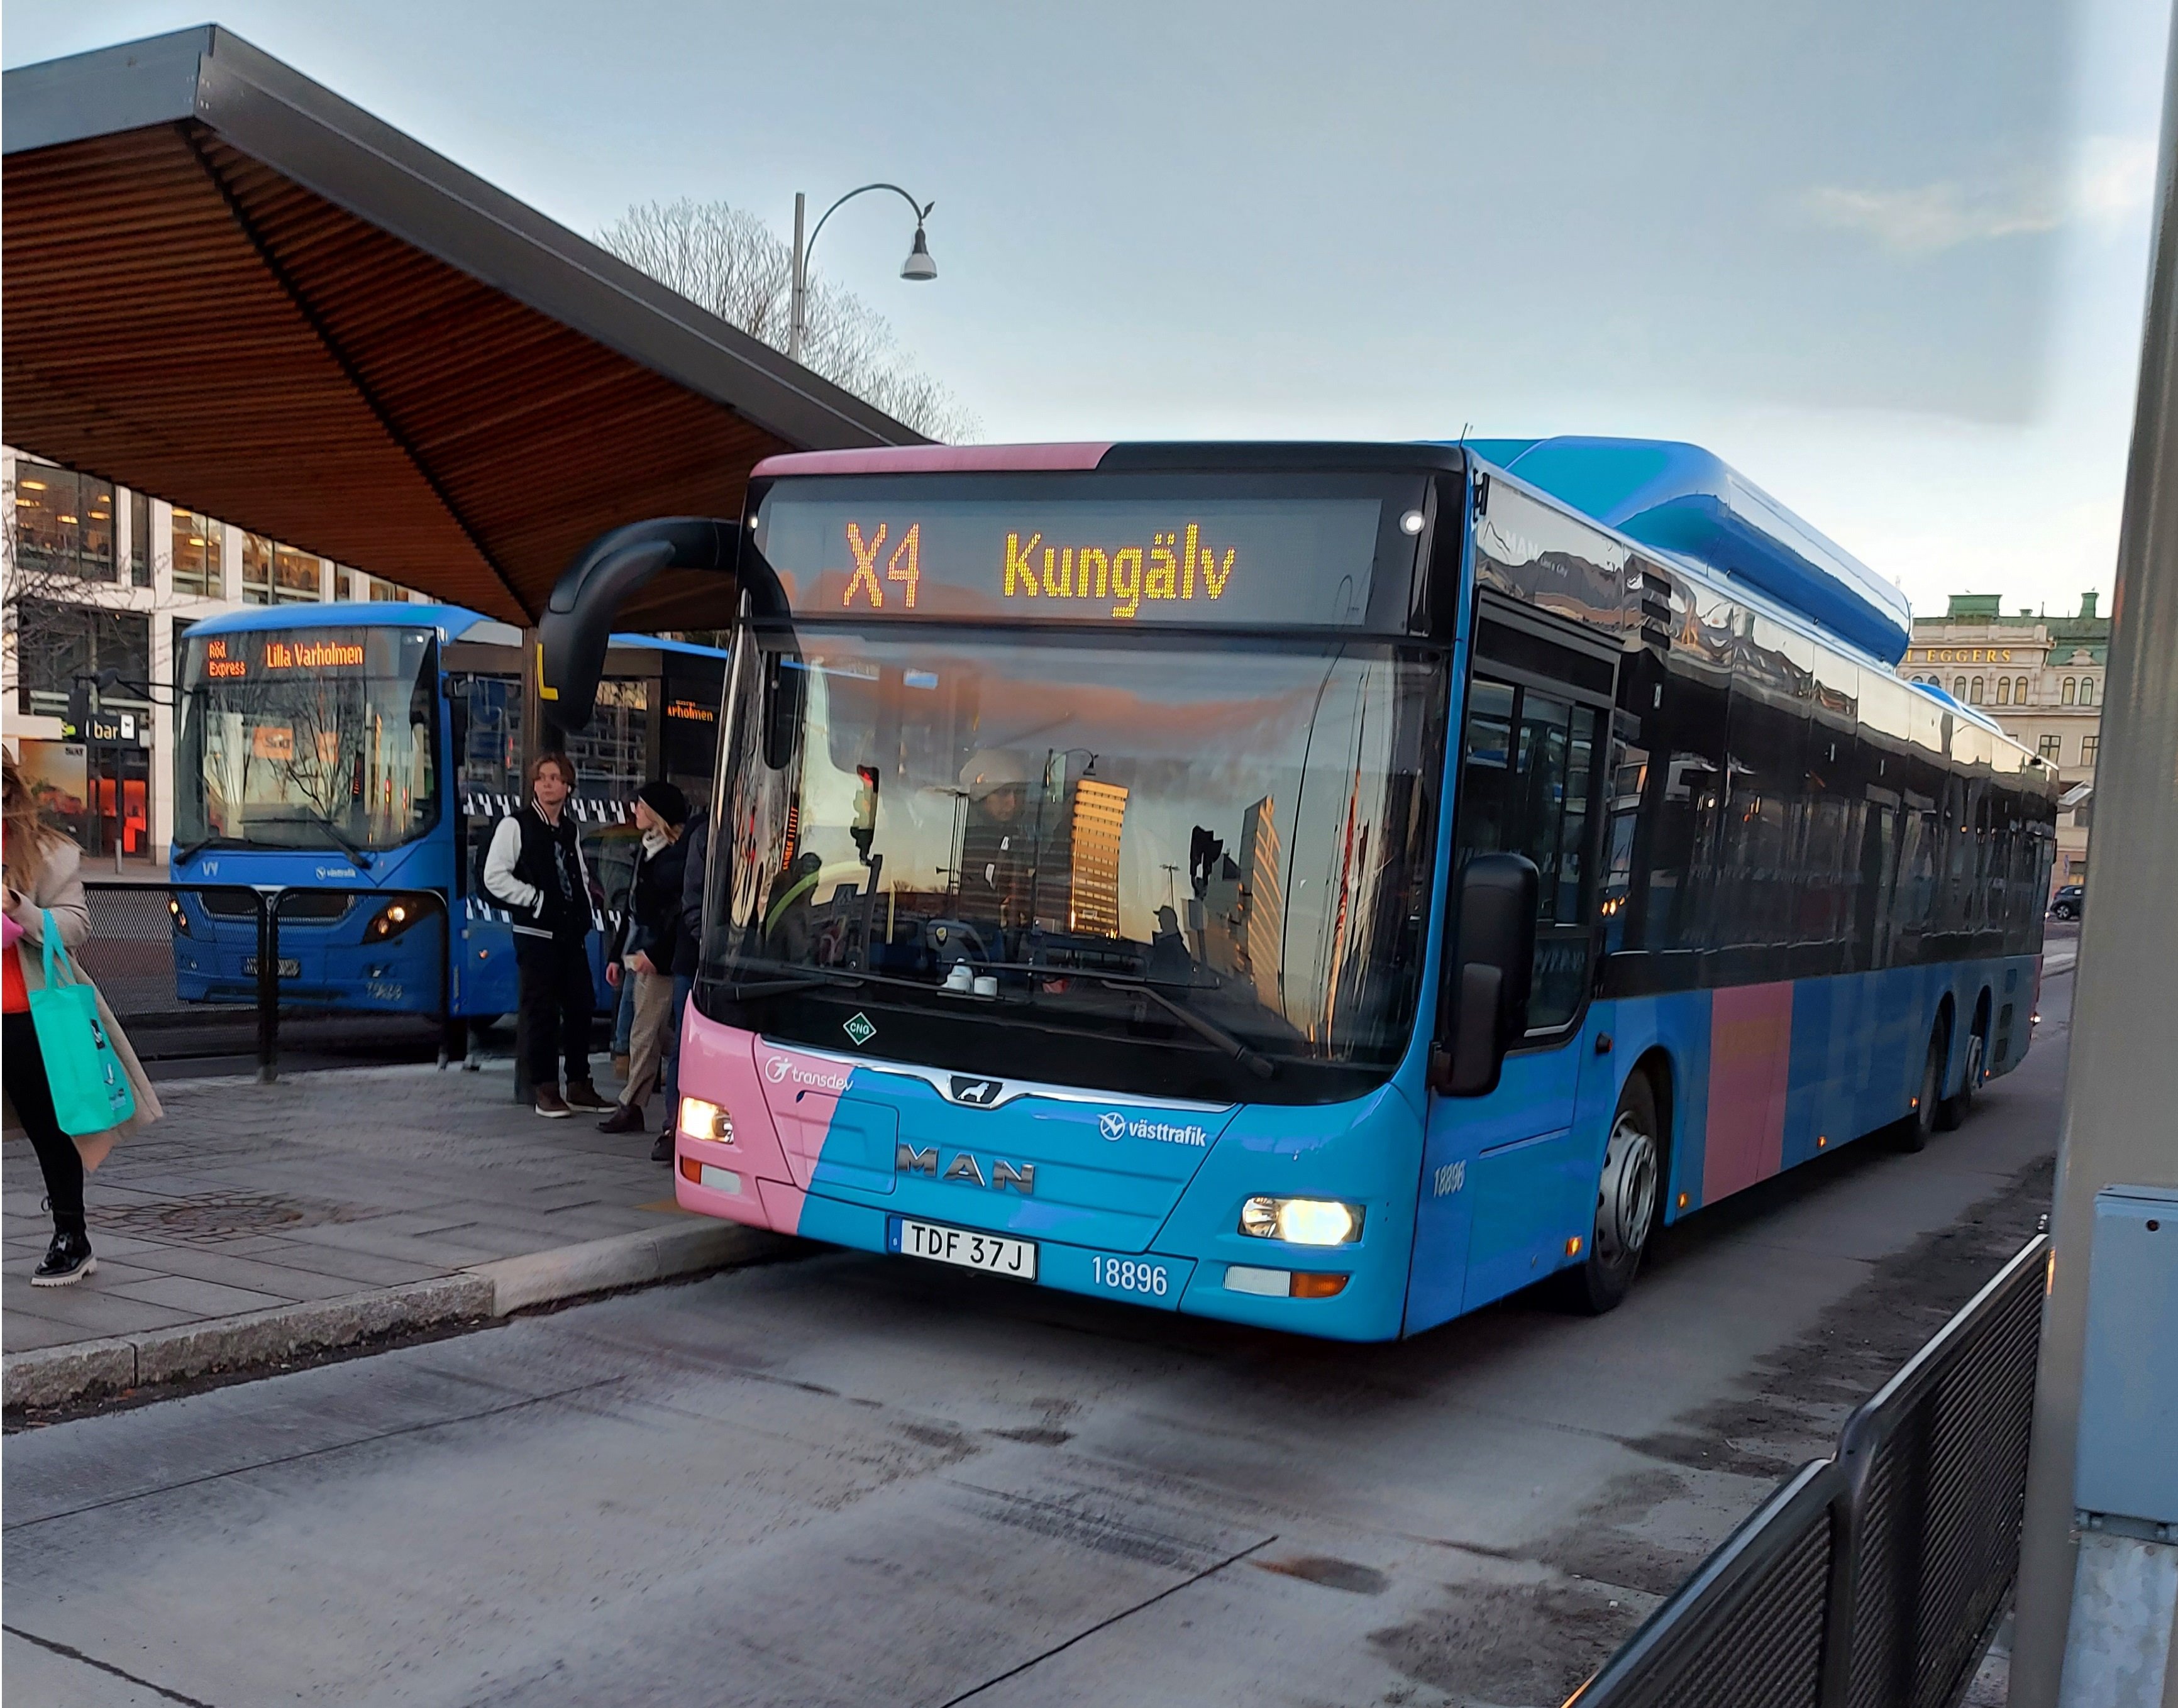 The bus to Kungalv